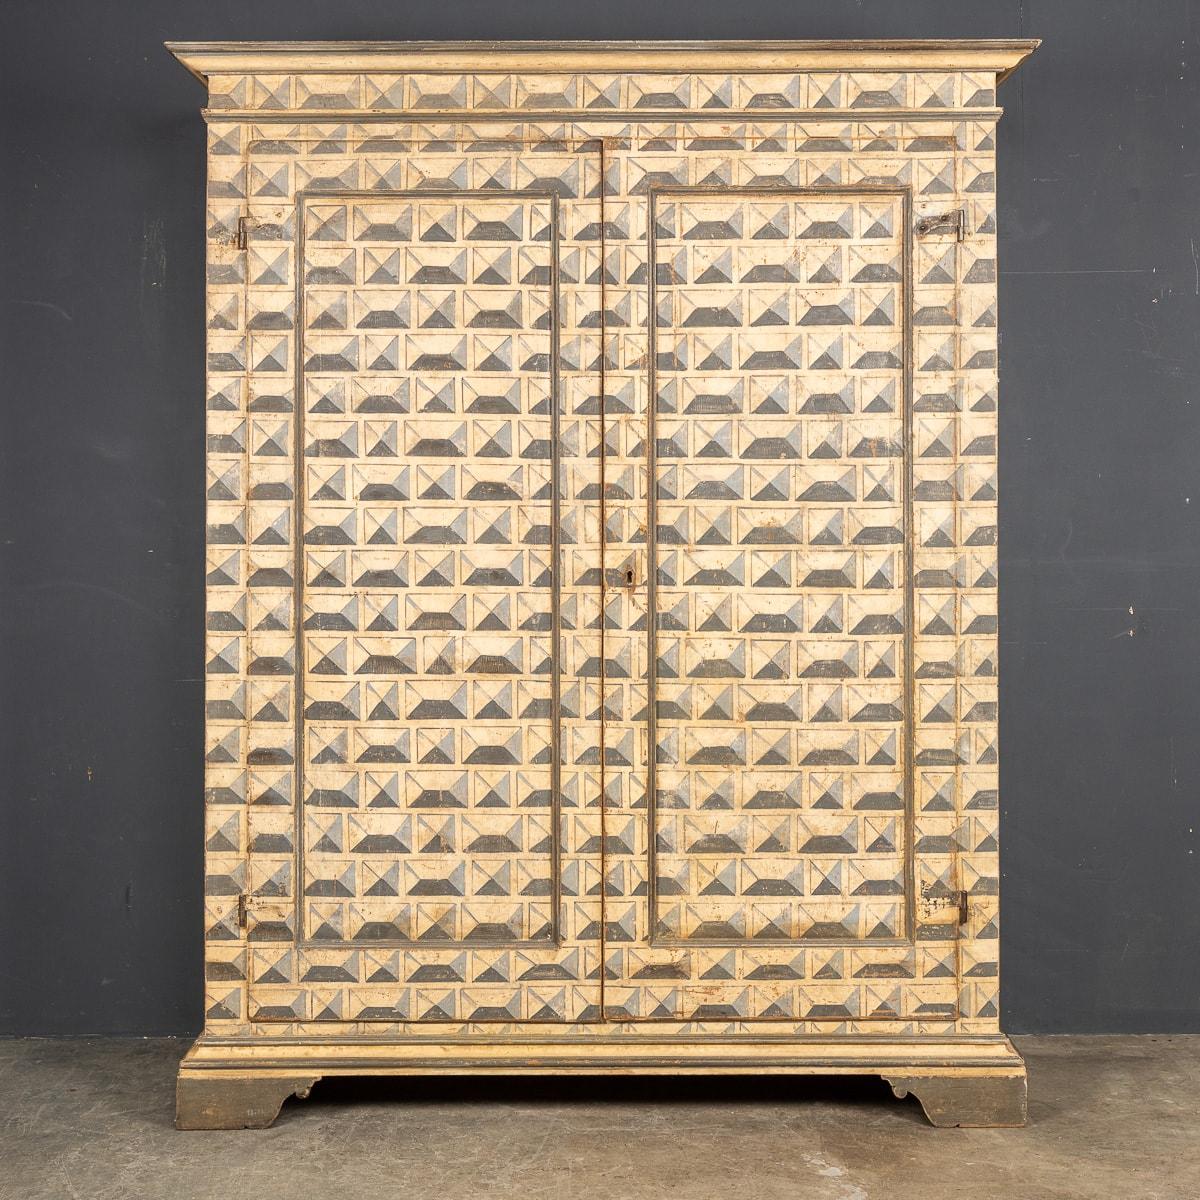 Antique 19th Century Italian wooden armoire, later painted in a striking geometric pattern. The armoire features centre opening cupboard doors revealing an internal hanging rail fitting and a wide drawer at the very bottom. A wonderful and rustic